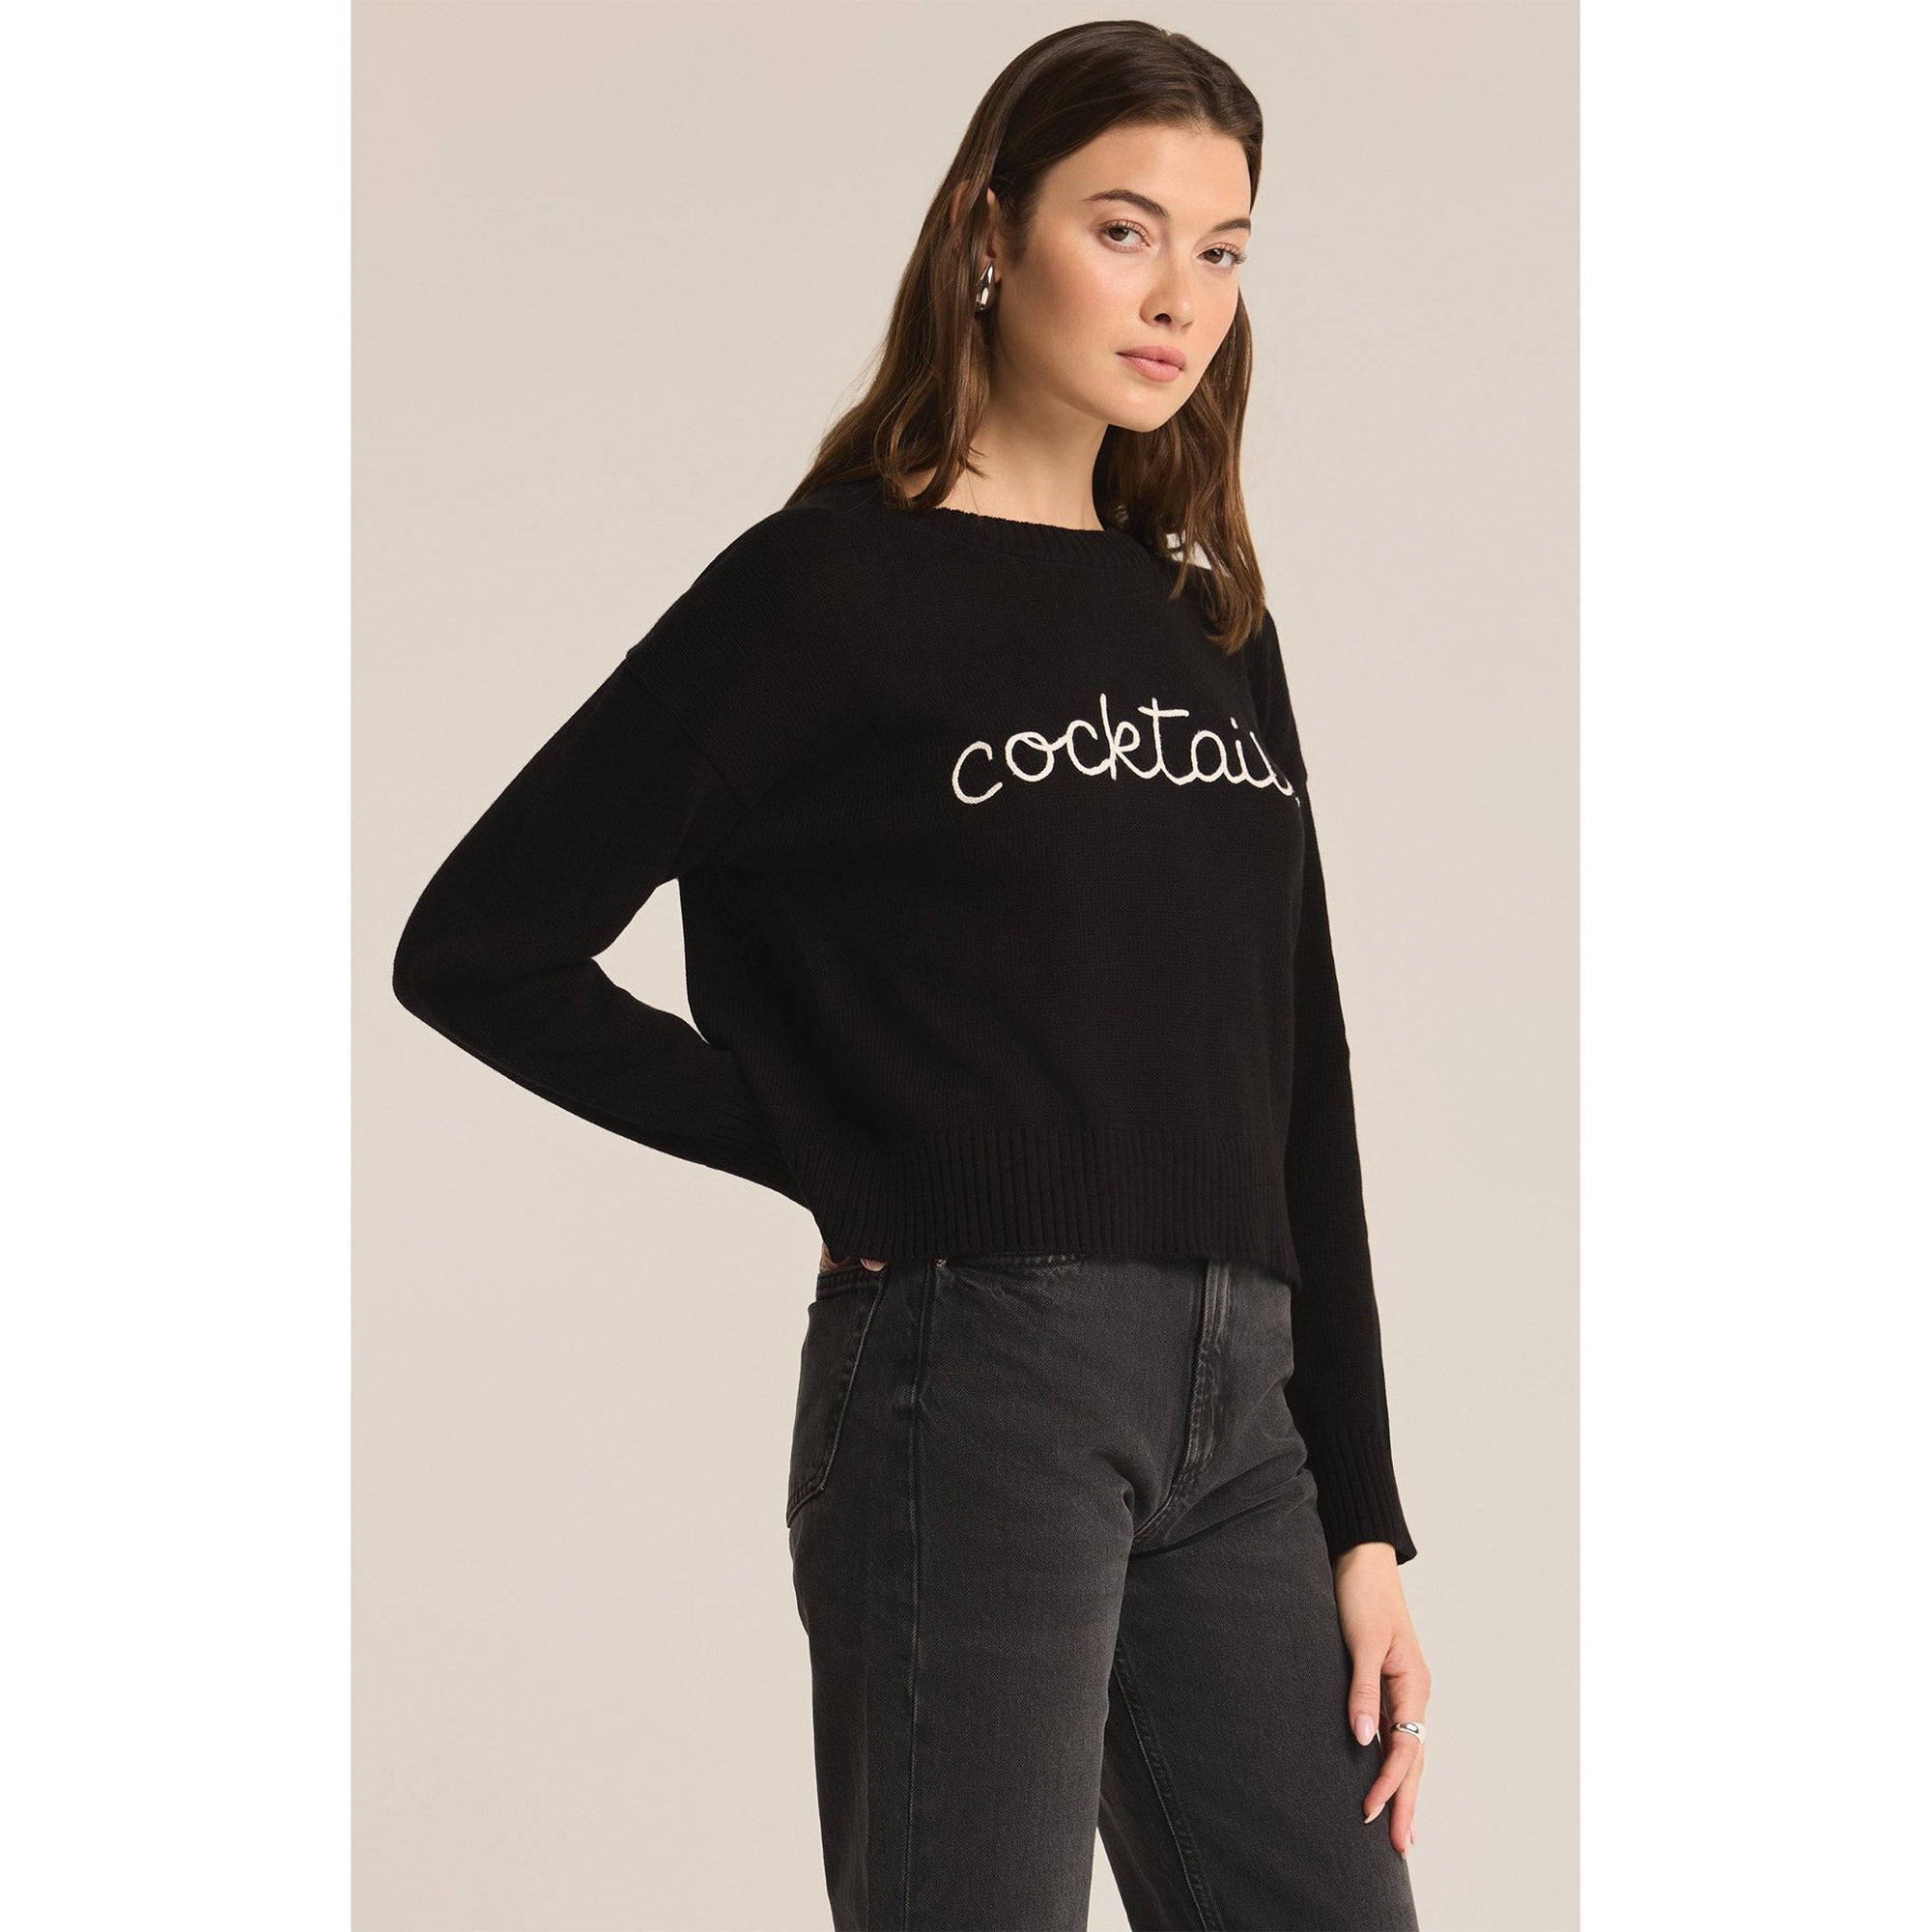 Z Supply Cocktails Sweater